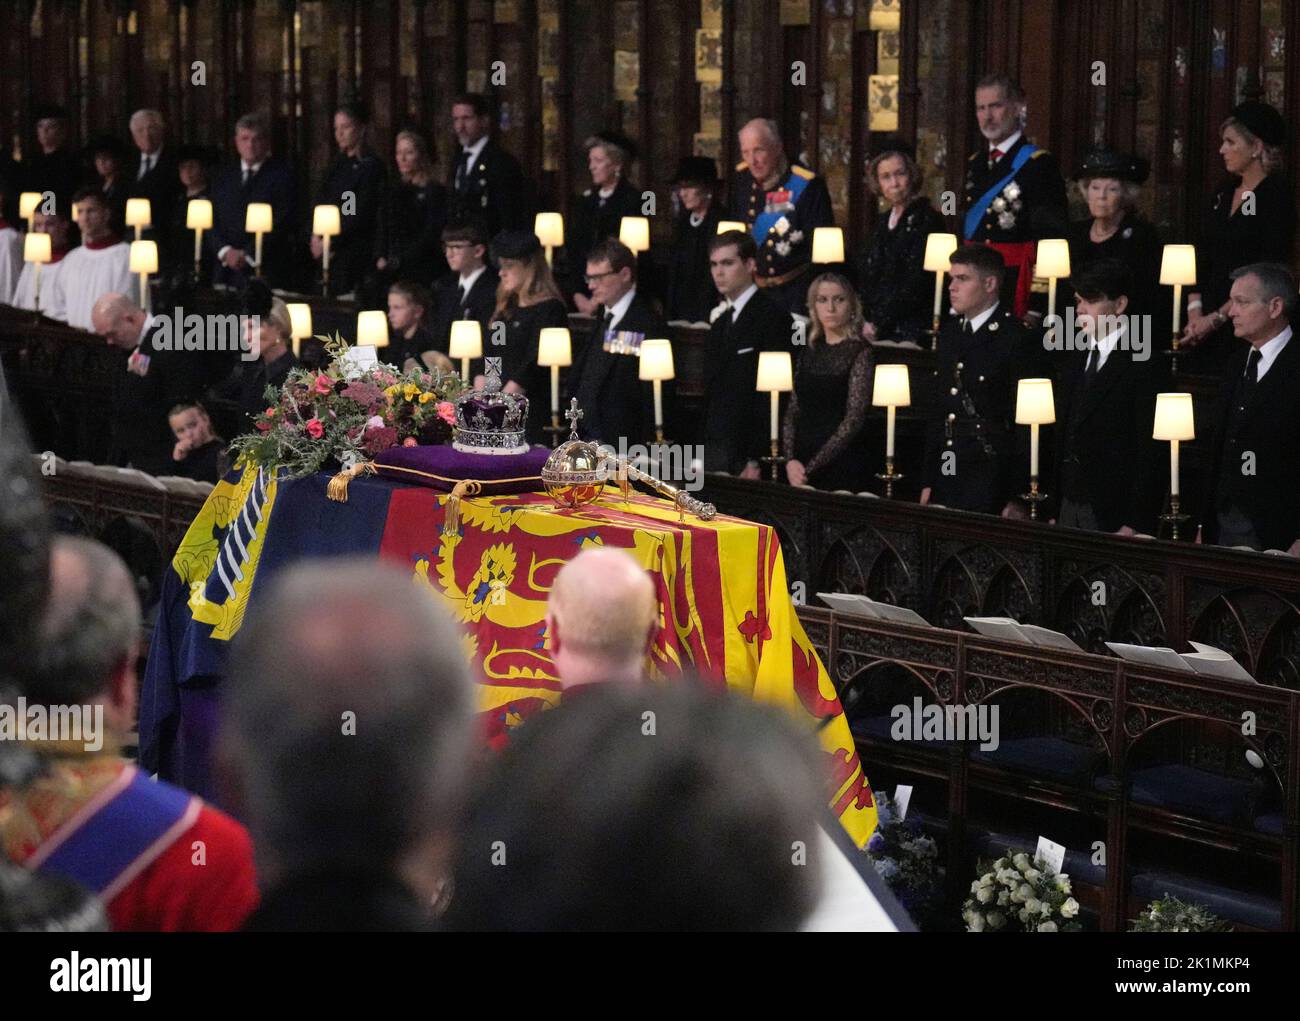 Members of the royal family stand for the coffin of Queen Elizabeth II, draped in the Royal Standard with the Imperial State Crown and the Sovereign's orb and sceptre, during the Committal Service at St George's Chapel in Windsor Castle, Berkshire. Picture date: Monday September 19, 2022. Stock Photo